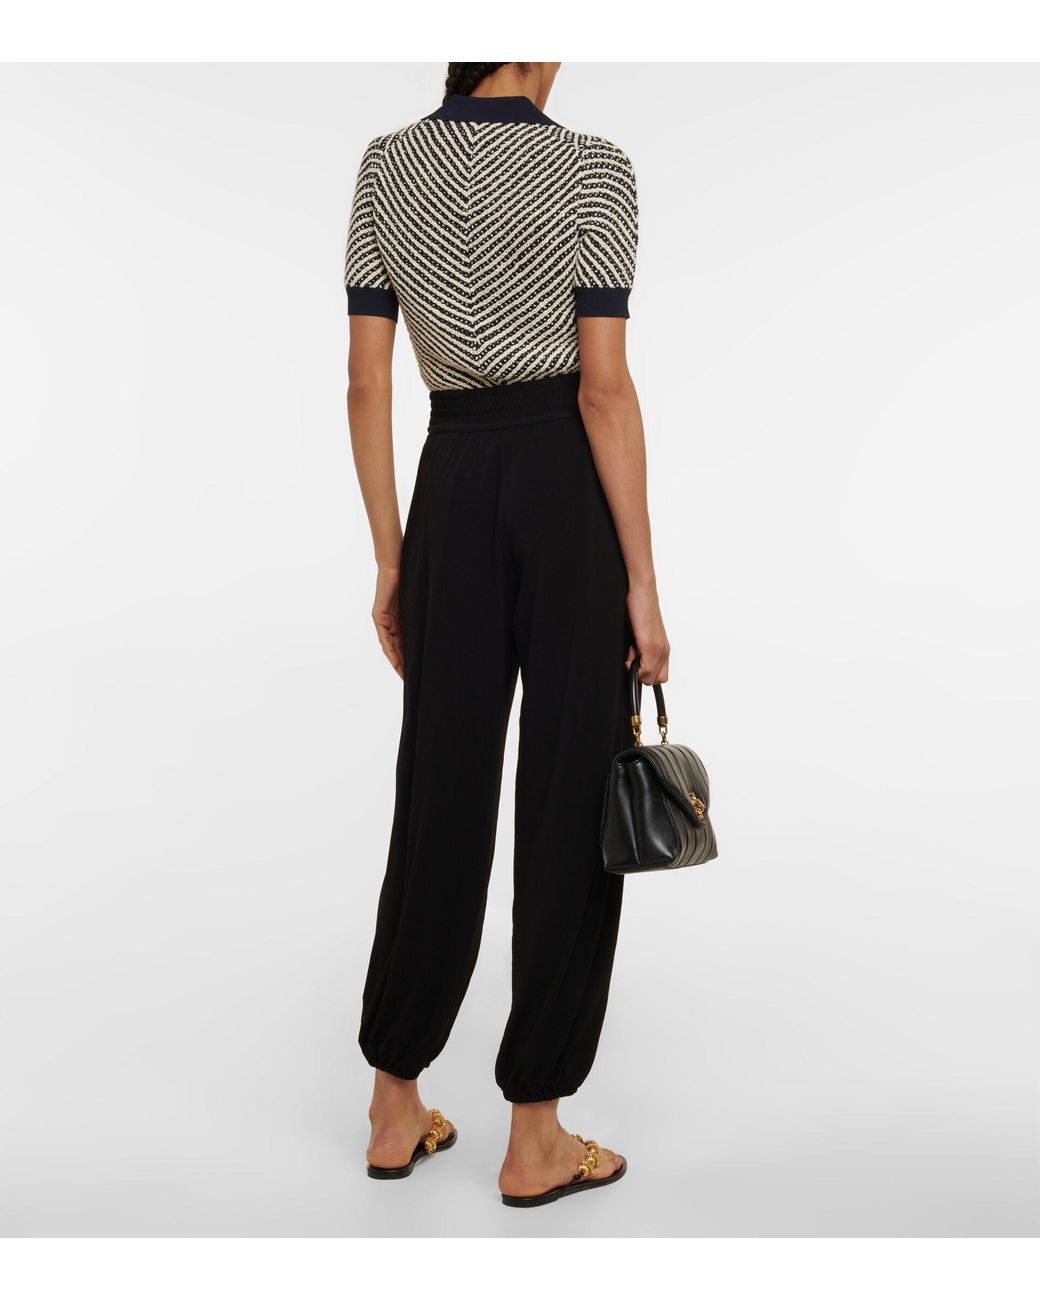 Tory Burch High-rise Jersey Pants in Black | Lyst